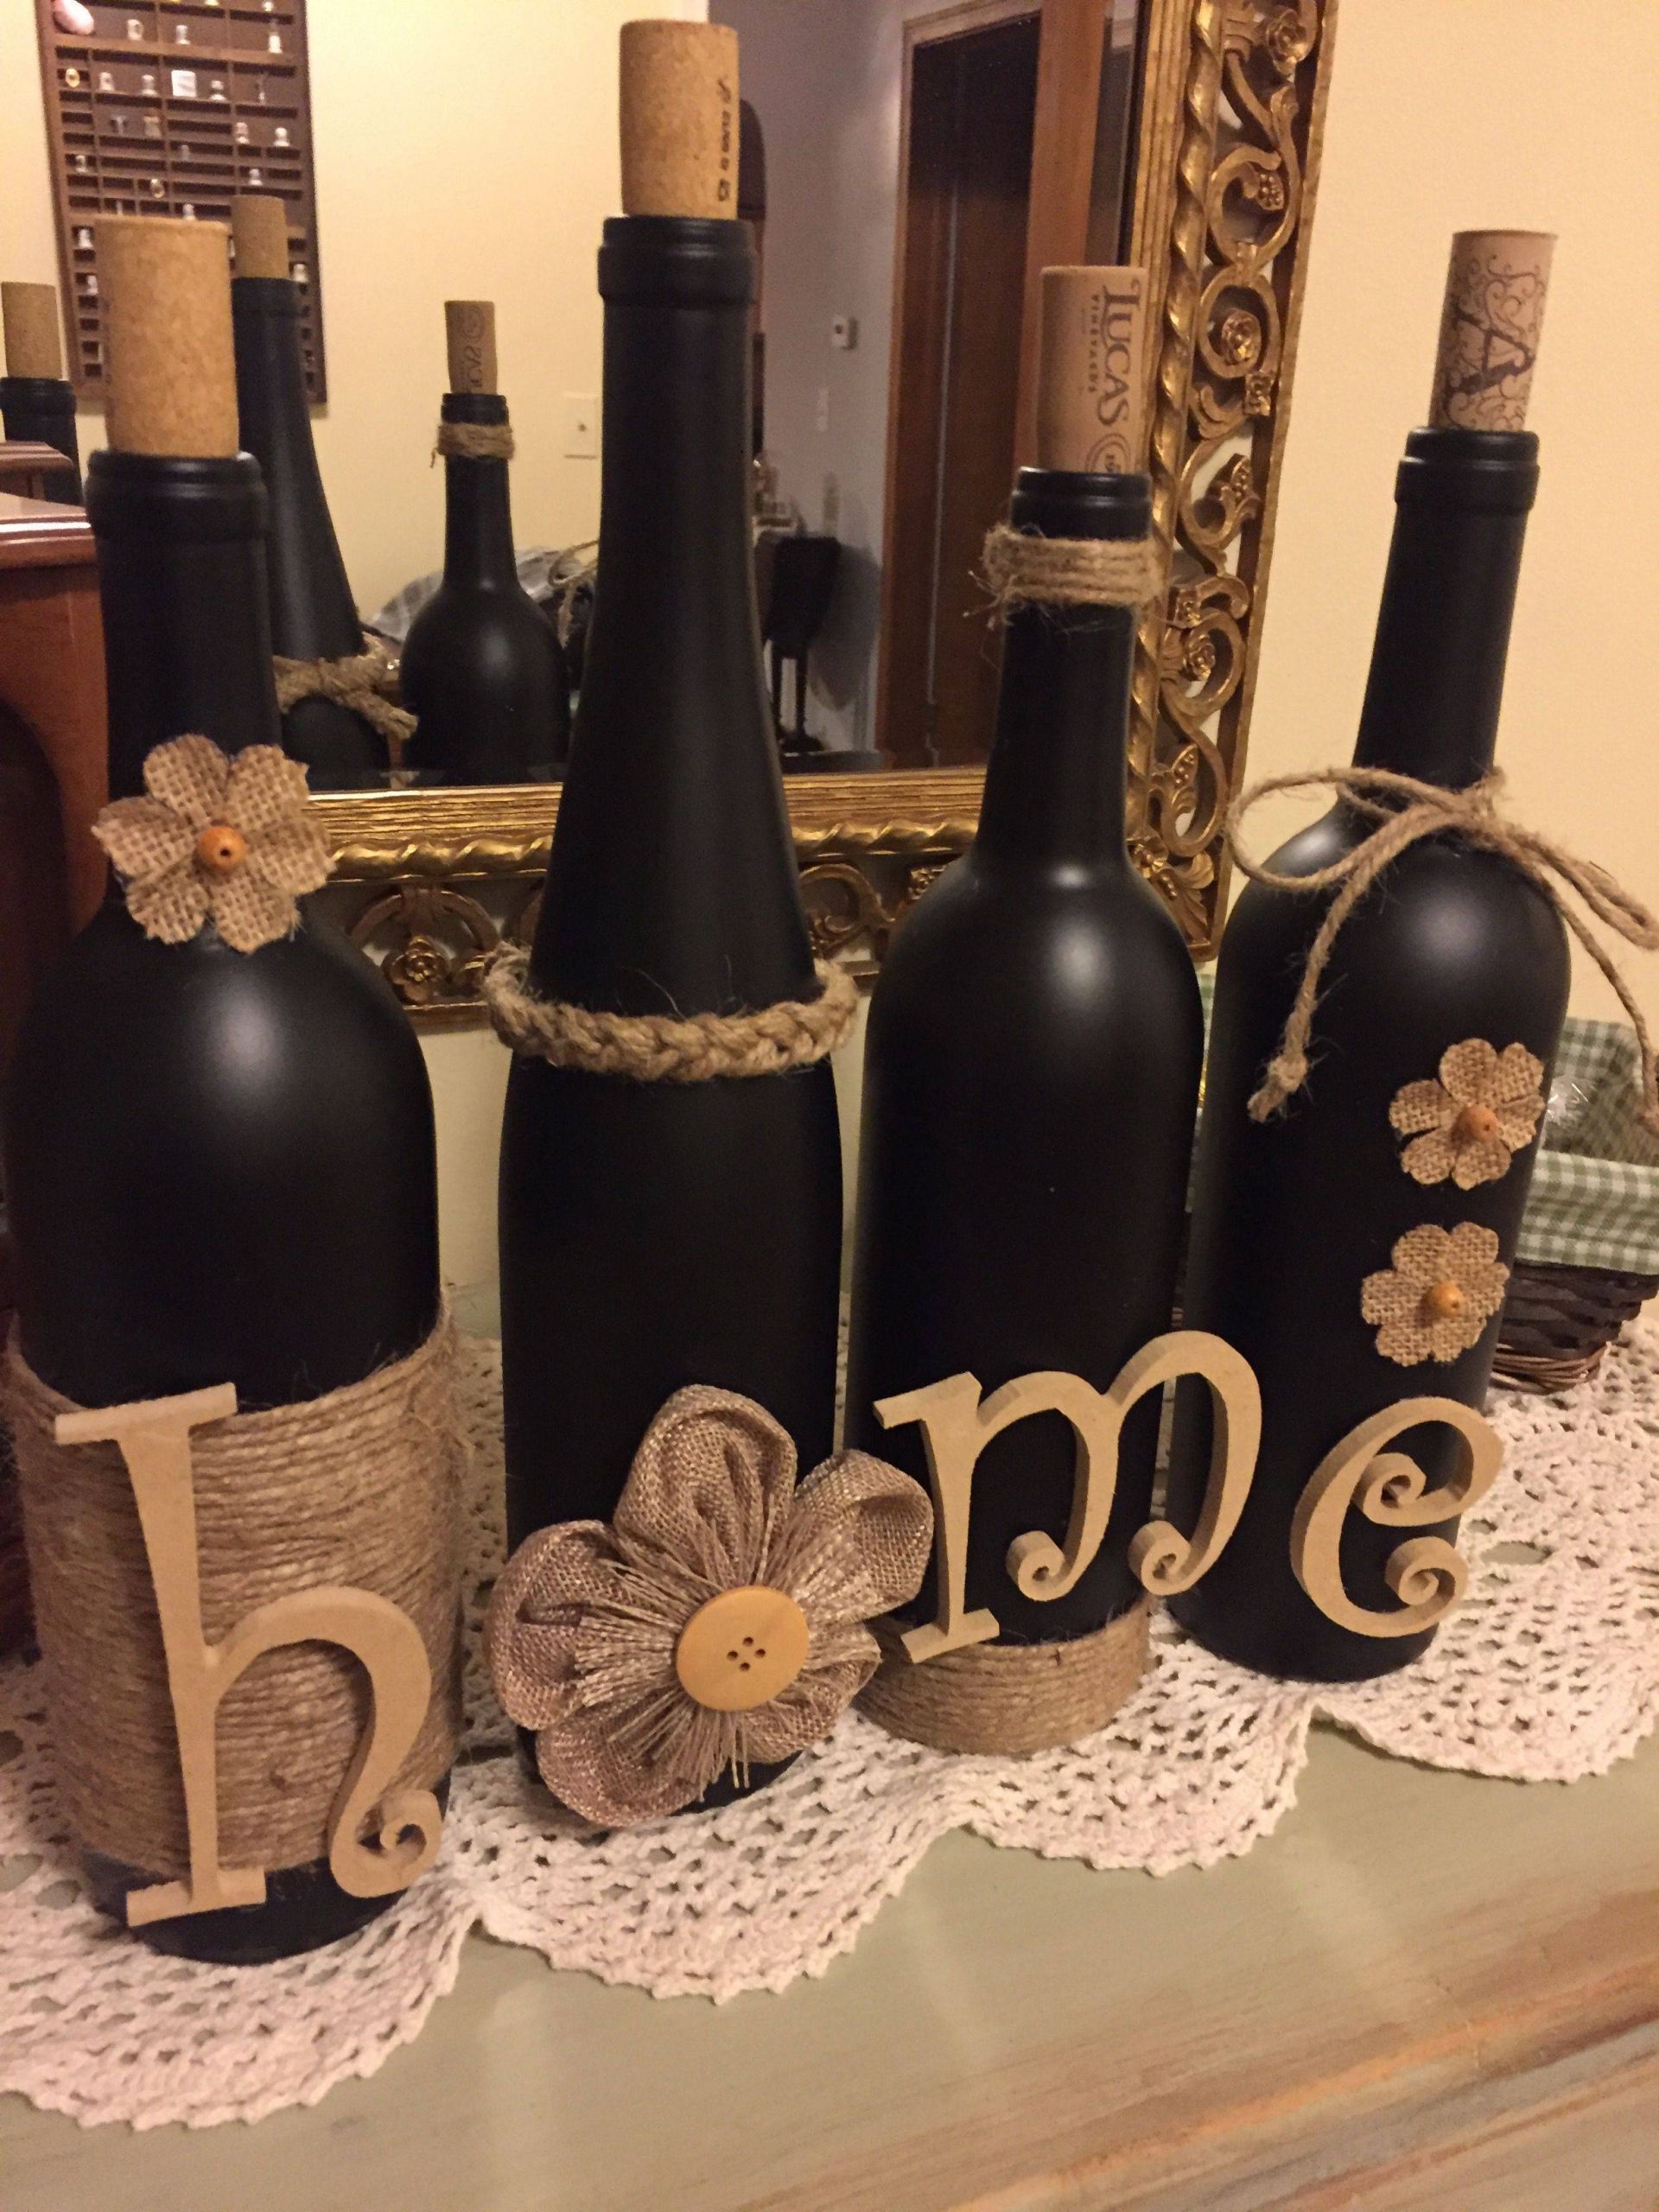 Incredible How To Decorate Glass Bottles With Fabric Best Of This Is Amazing Diy Wine Bottle Crafts You Must Try It Of Incredible How To Decorate Glass Bottles With Fabric Scaled ?is Pending Load=1